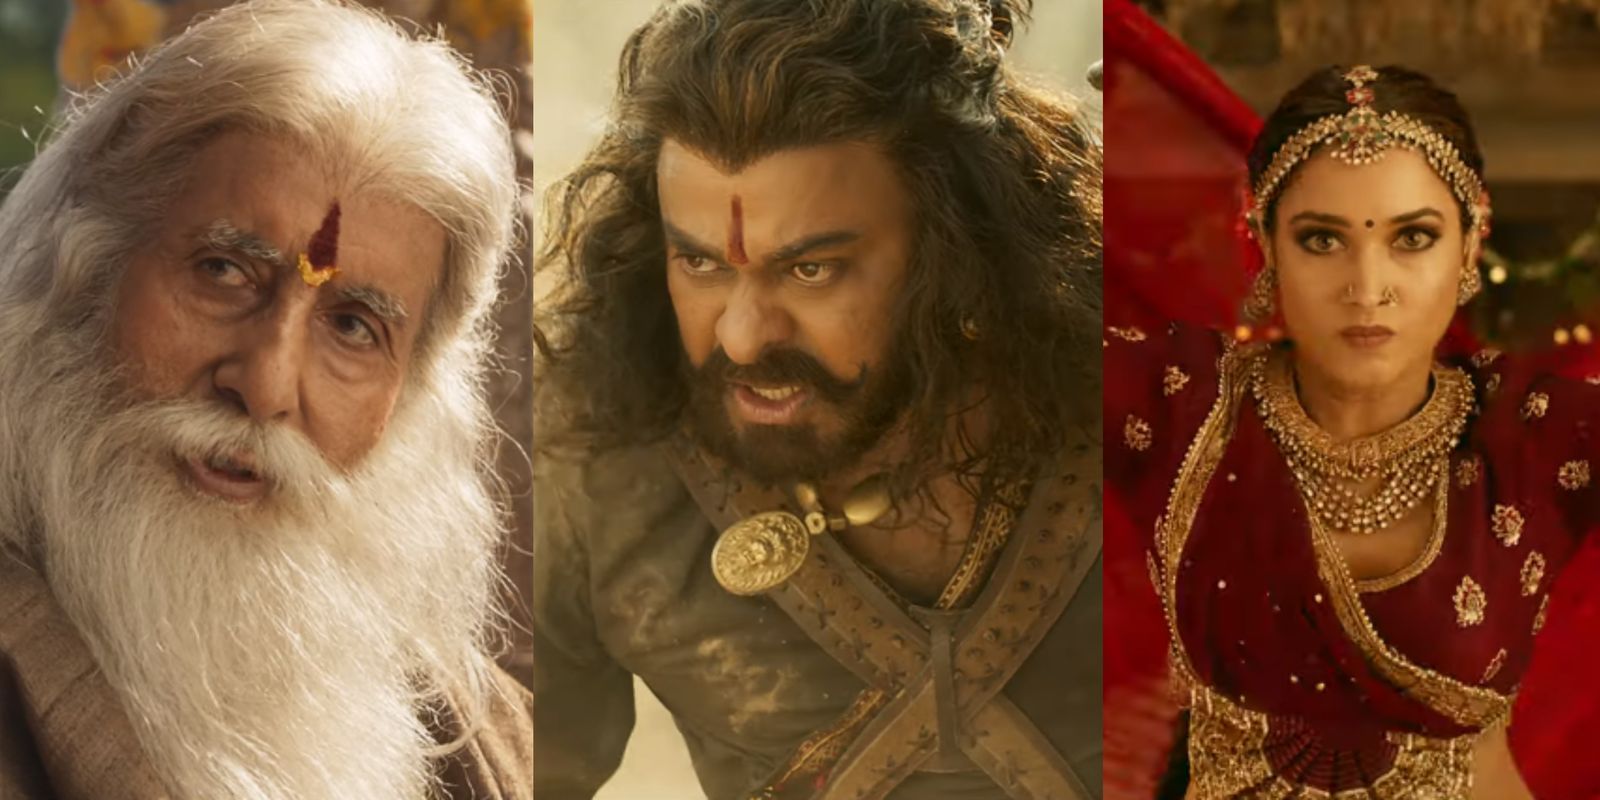 Sye Raa Narasimha Reddy Trailer: The Grandeur Would Remind You Of Baahubali, But This One Is Based On A True Story!